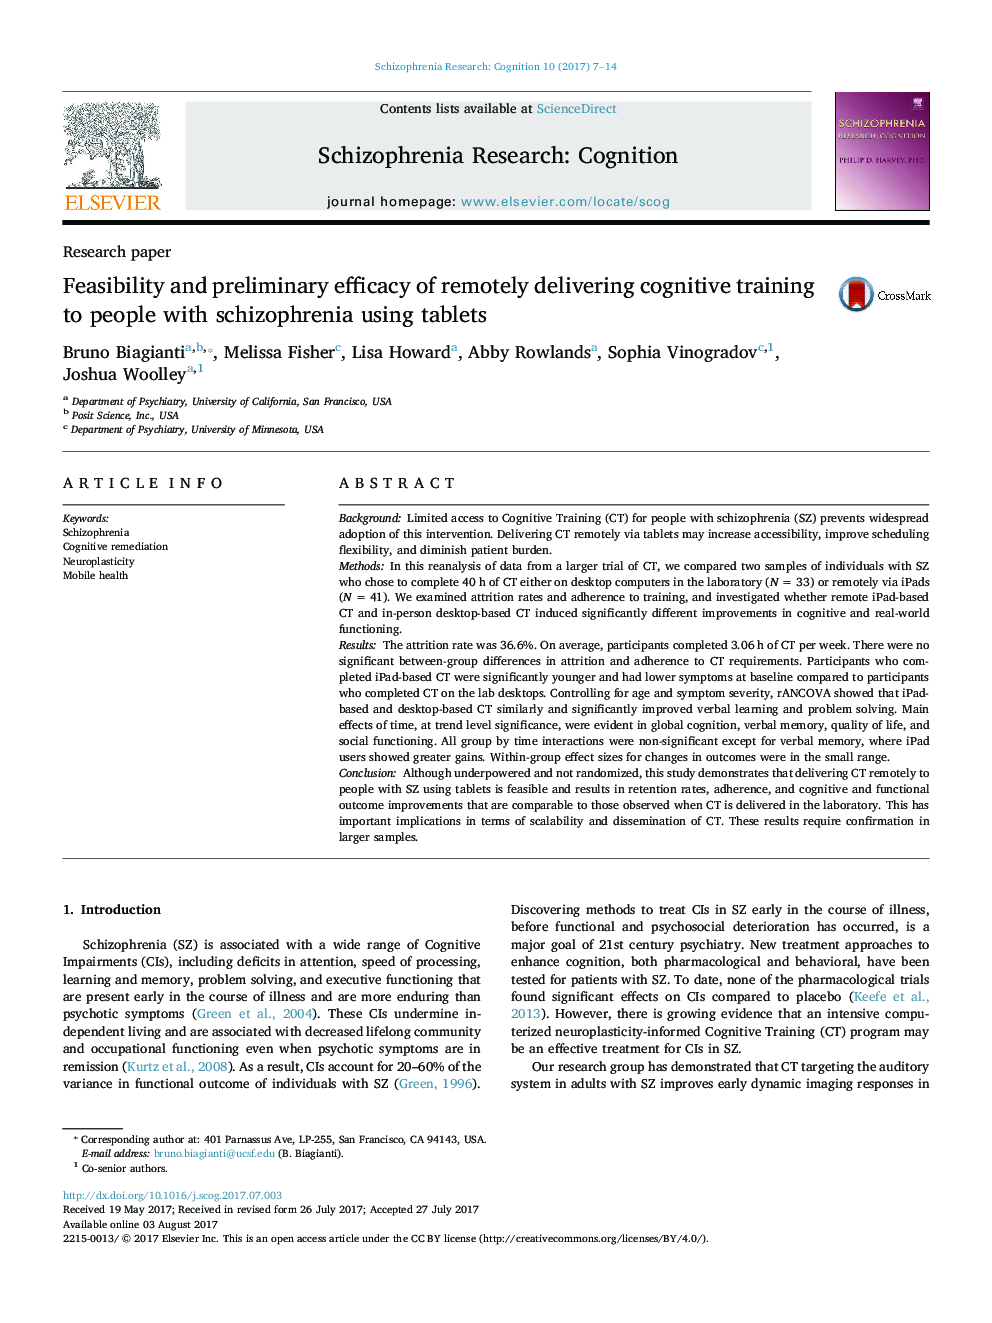 Research paperFeasibility and preliminary efficacy of remotely delivering cognitive training to people with schizophrenia using tablets